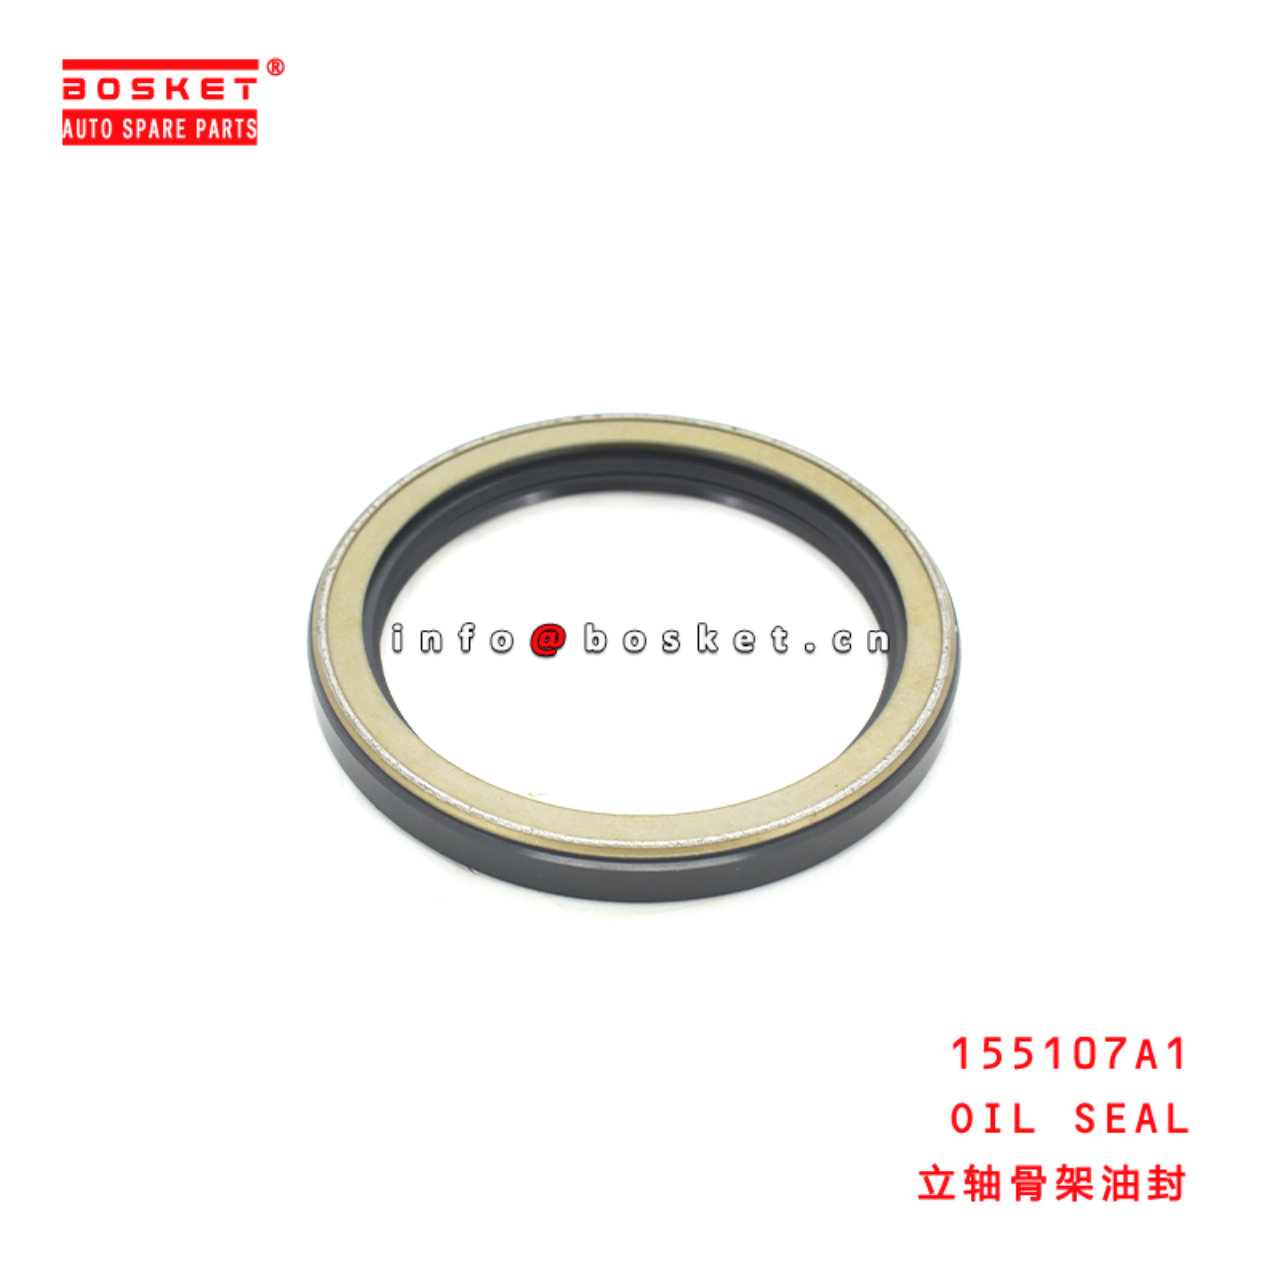 155107A1 Oil Seal Suitable for ISUZU